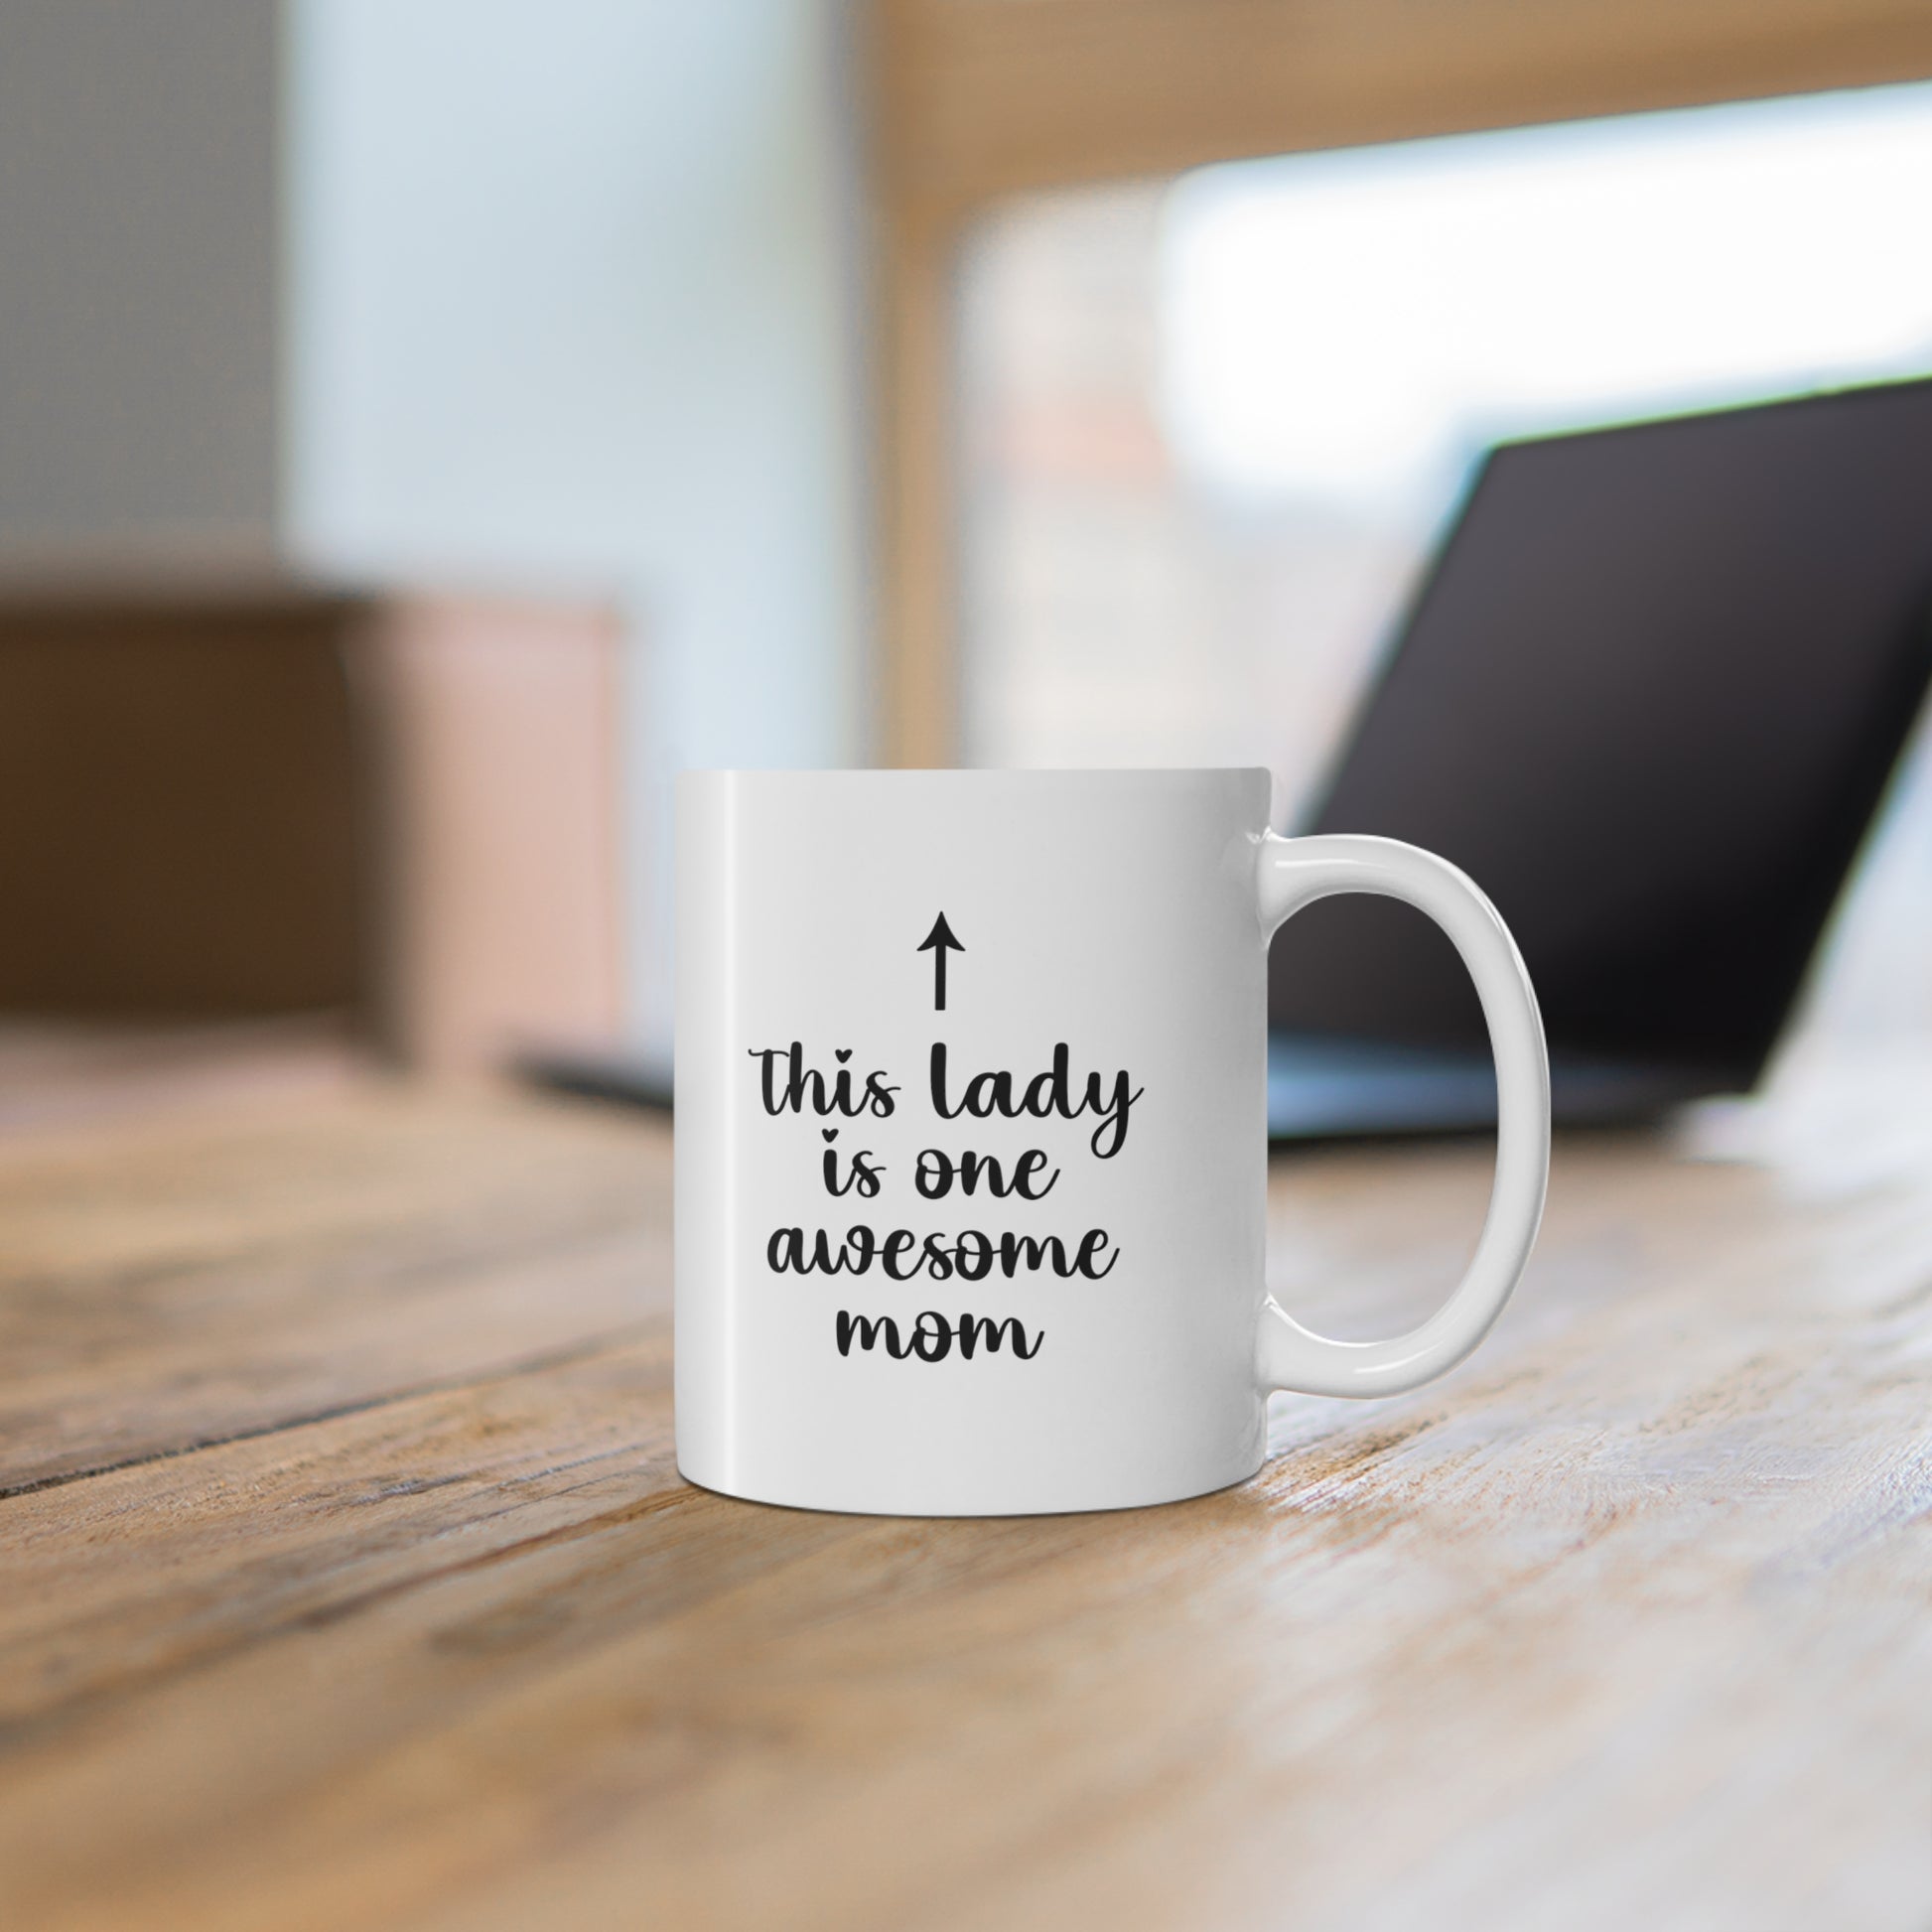 11oz ceramic mug with quote This Lady Is One Awesome Mom